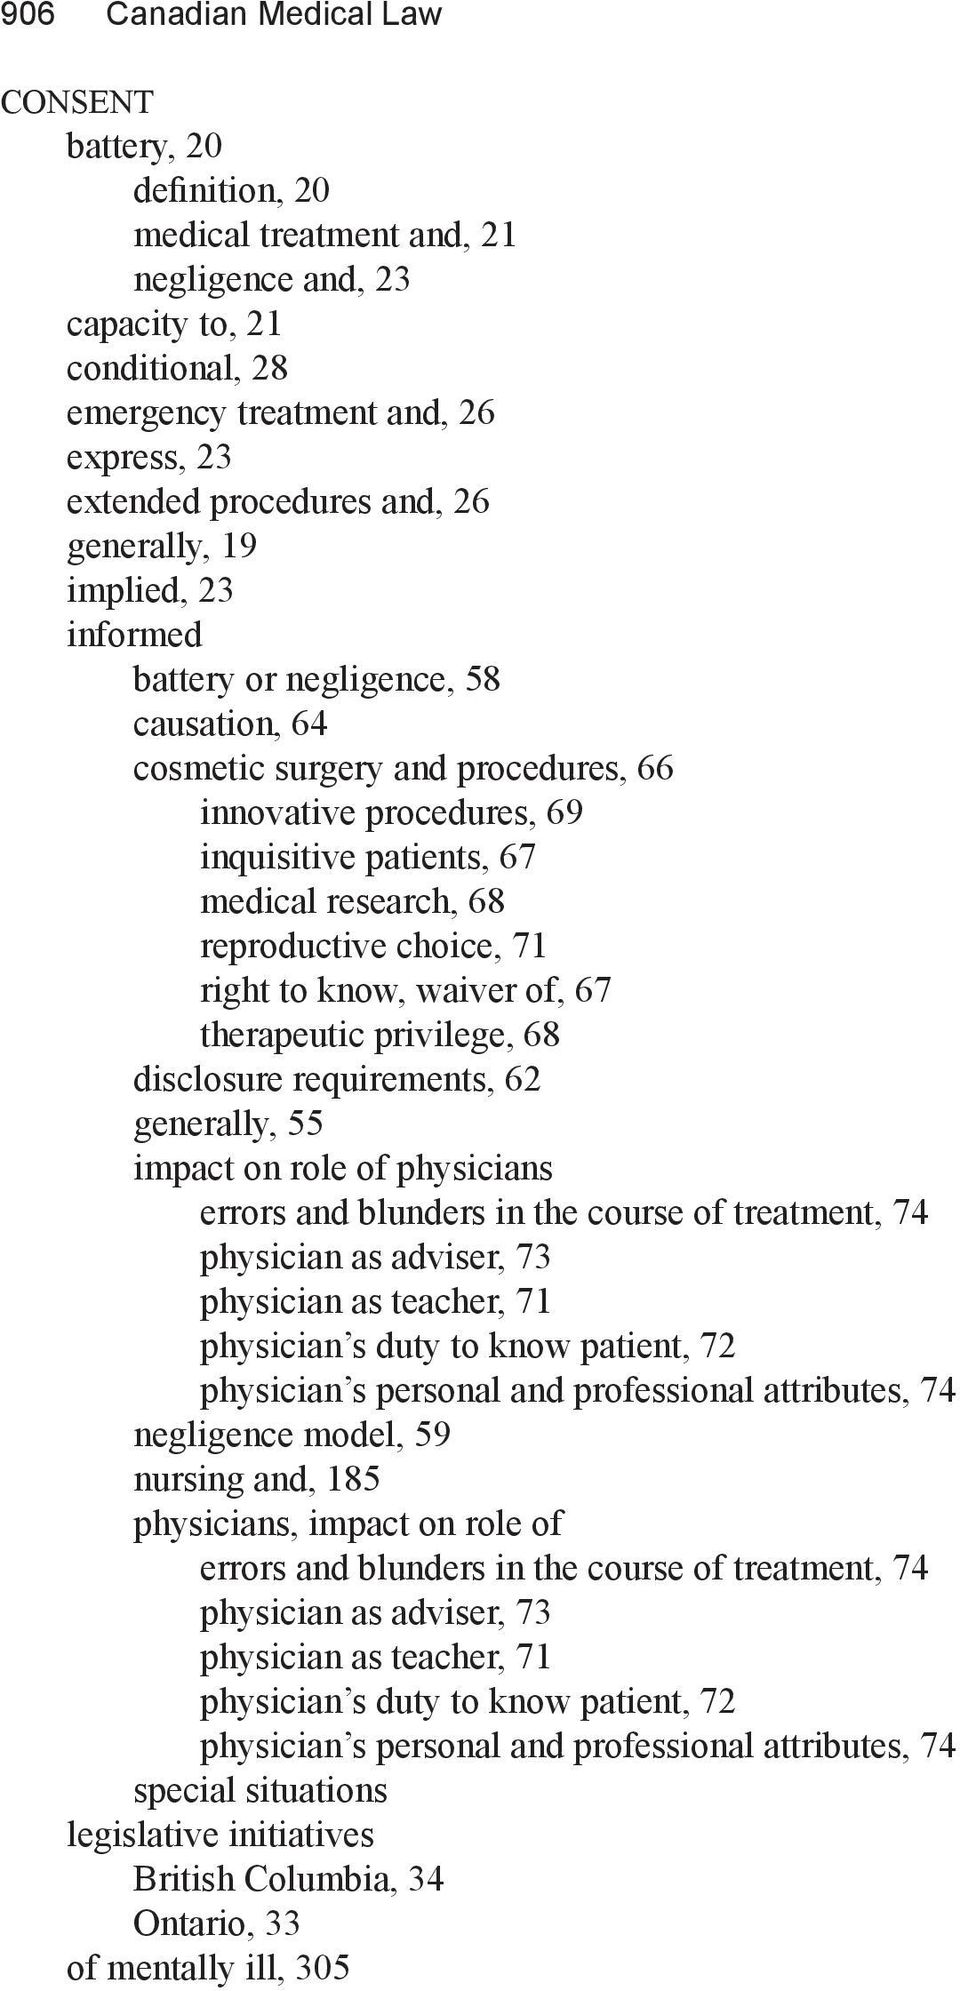 reproductive choice, 71 right to know, waiver of, 67 therapeutic privilege, 68 disclosure requirements, 62 generally, 55 impact on role of physicians errors and blunders in the course of treatment,